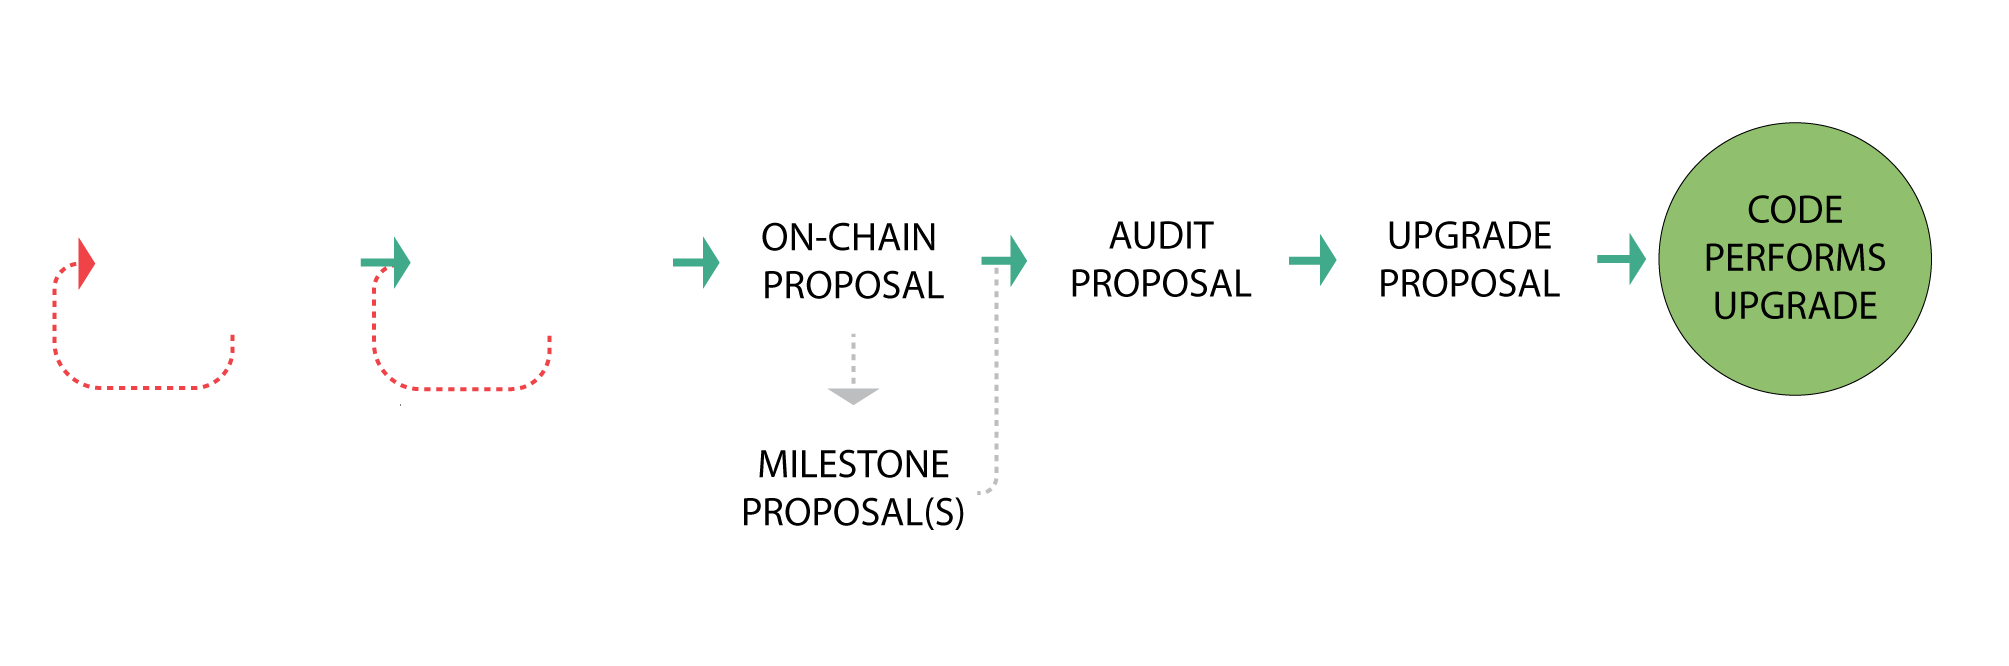 Contract Upgrade Process